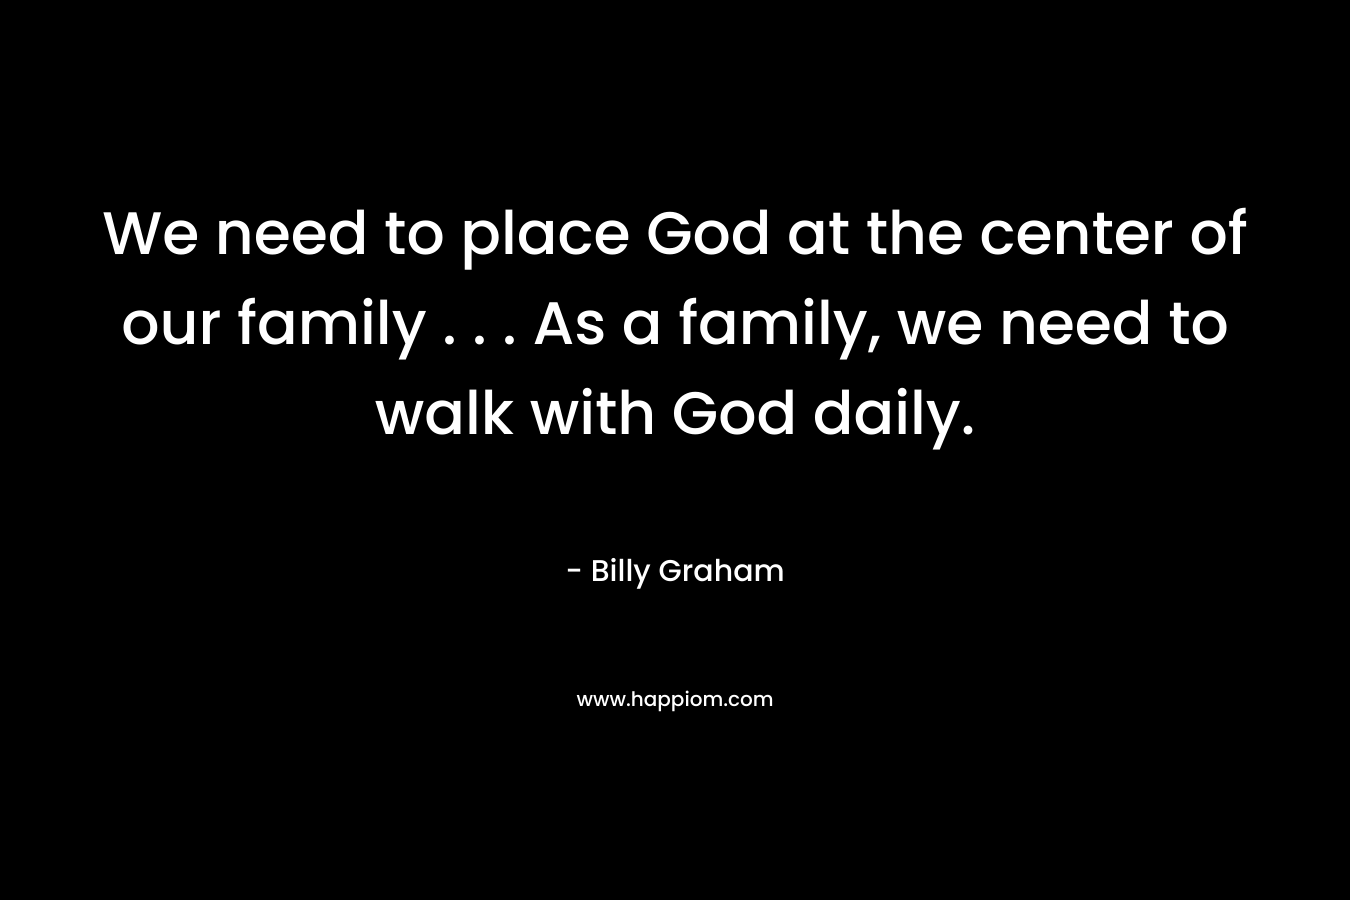 We need to place God at the center of our family . . . As a family, we need to walk with God daily.